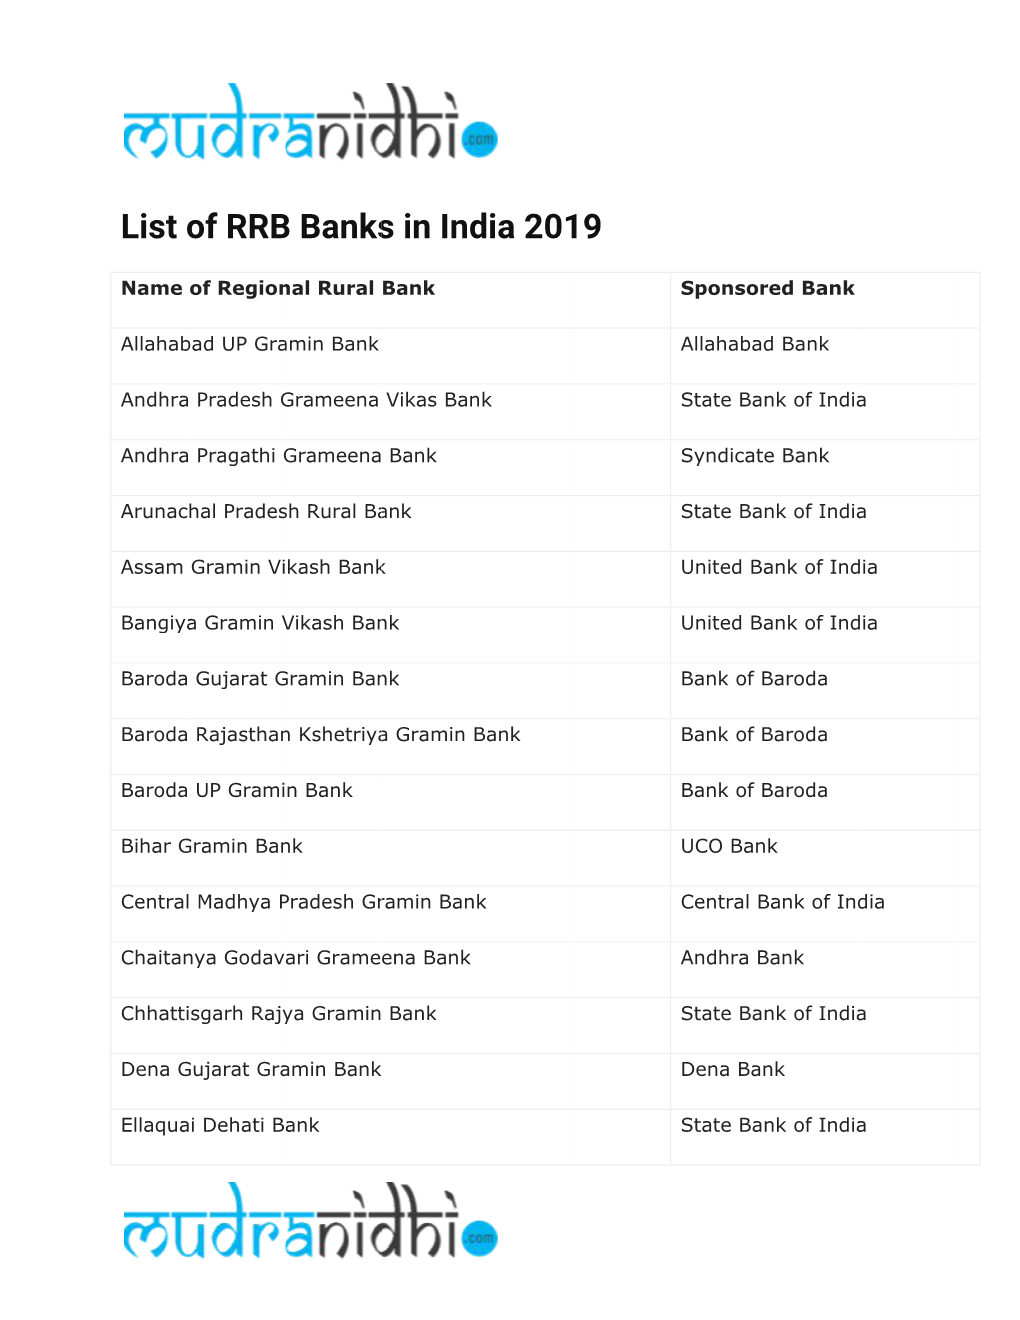 List of RRB Banks in India 2019